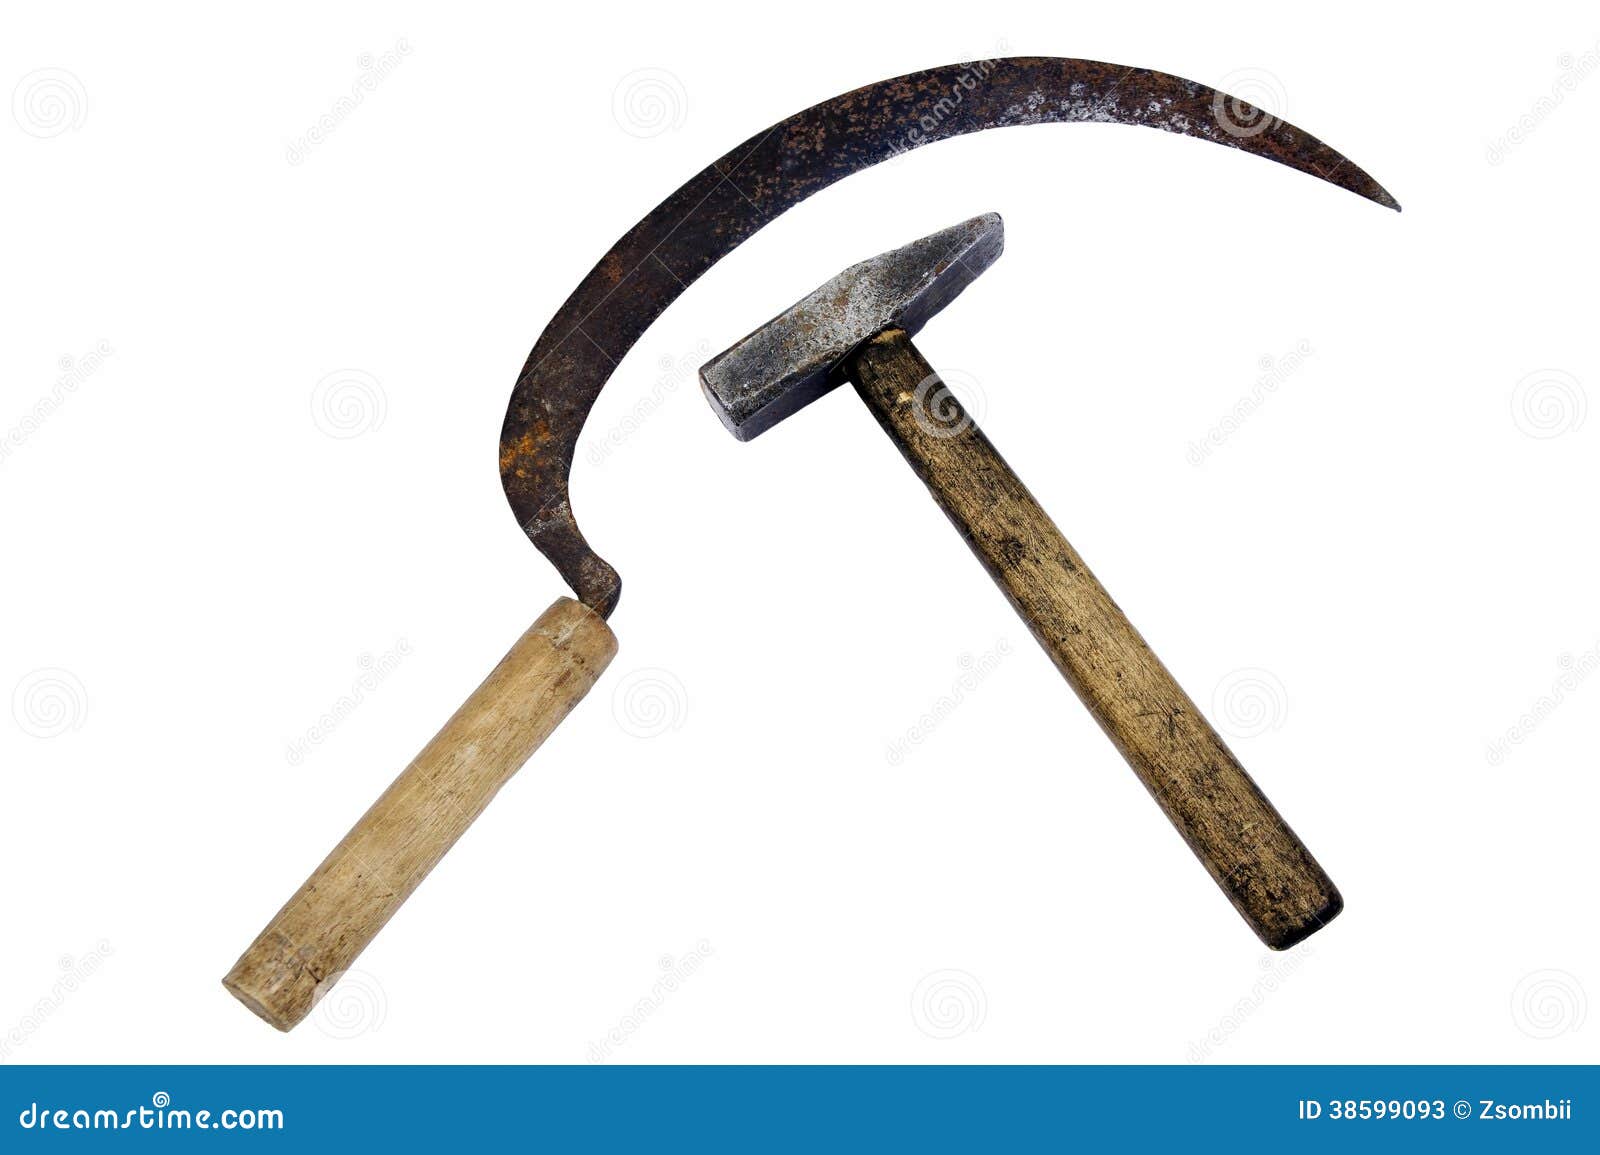 Hammer and sickle stock image. Image of work, grunge - 38599093